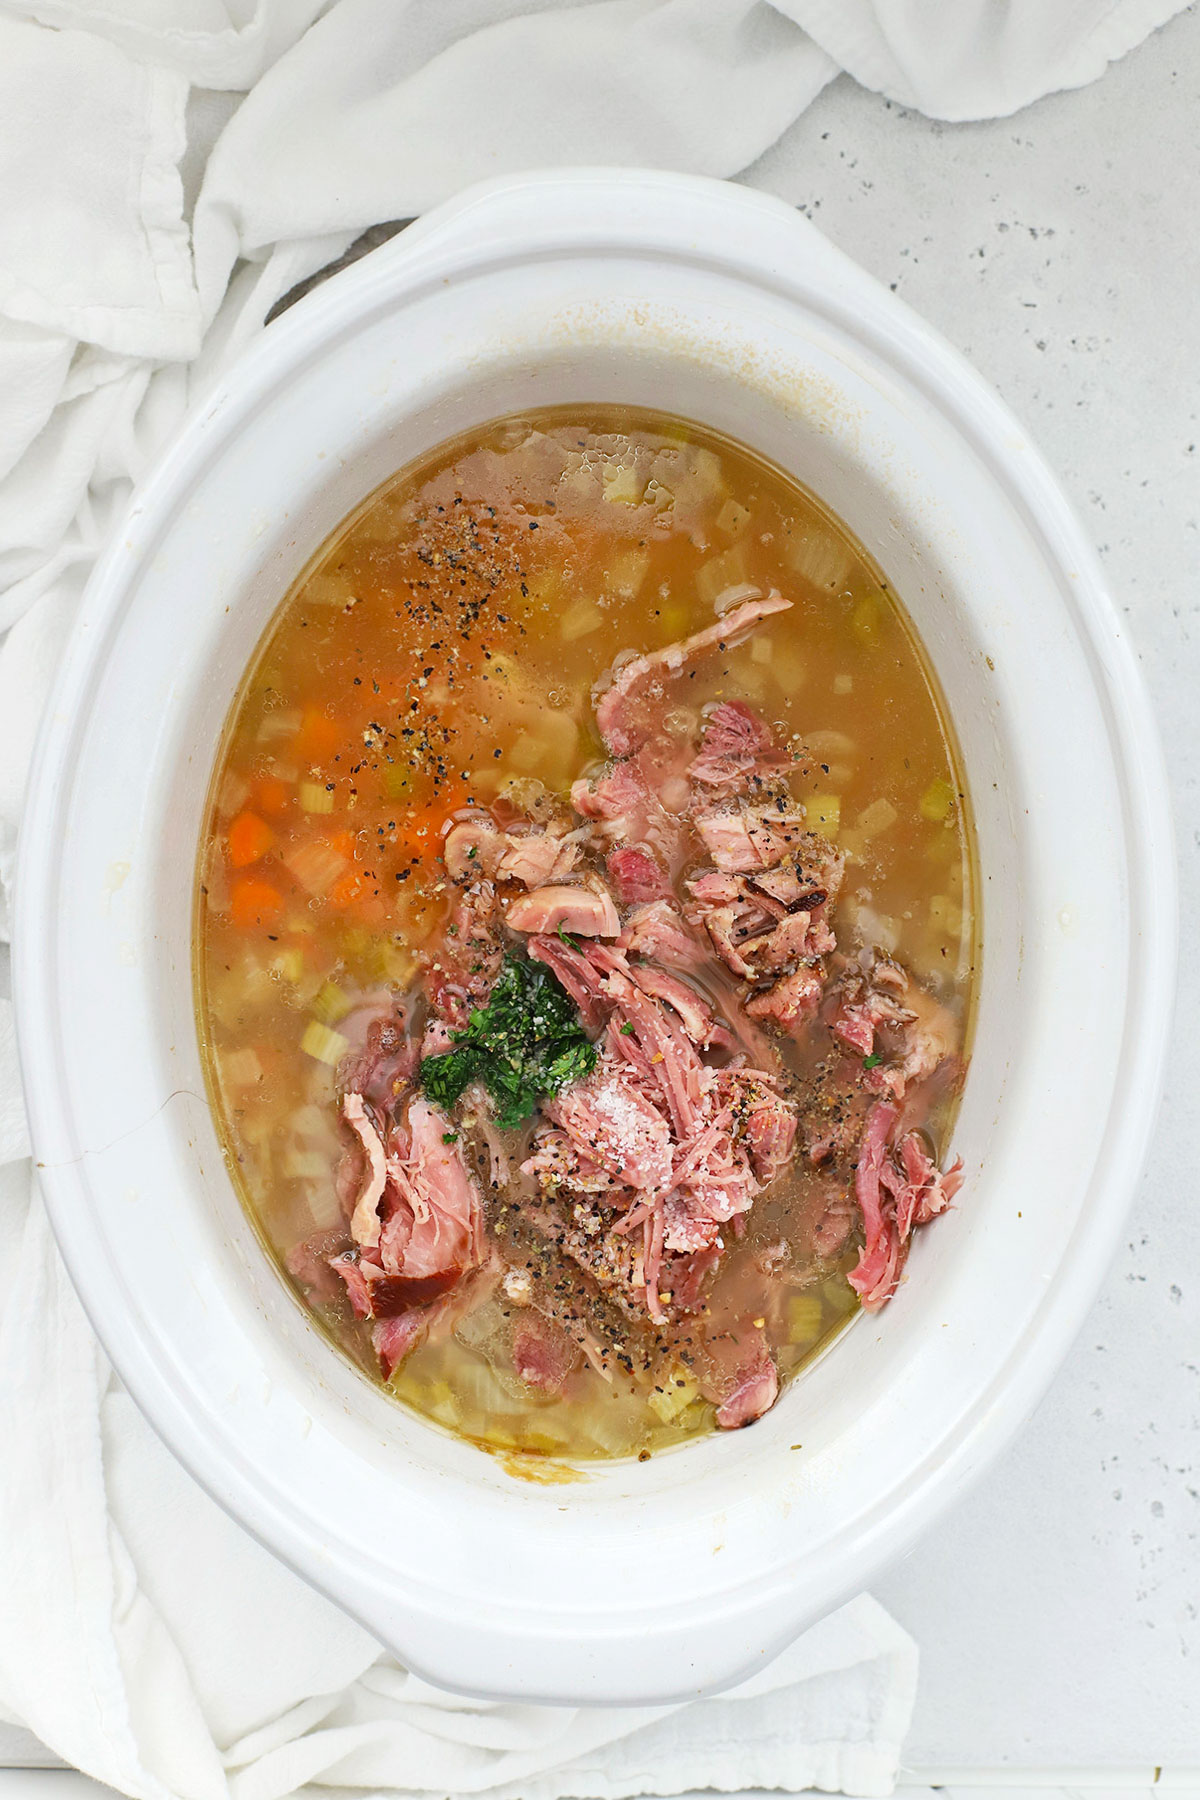 Shredding ham and adding fresh herbs and seasoning to slow cooker ham bean soup